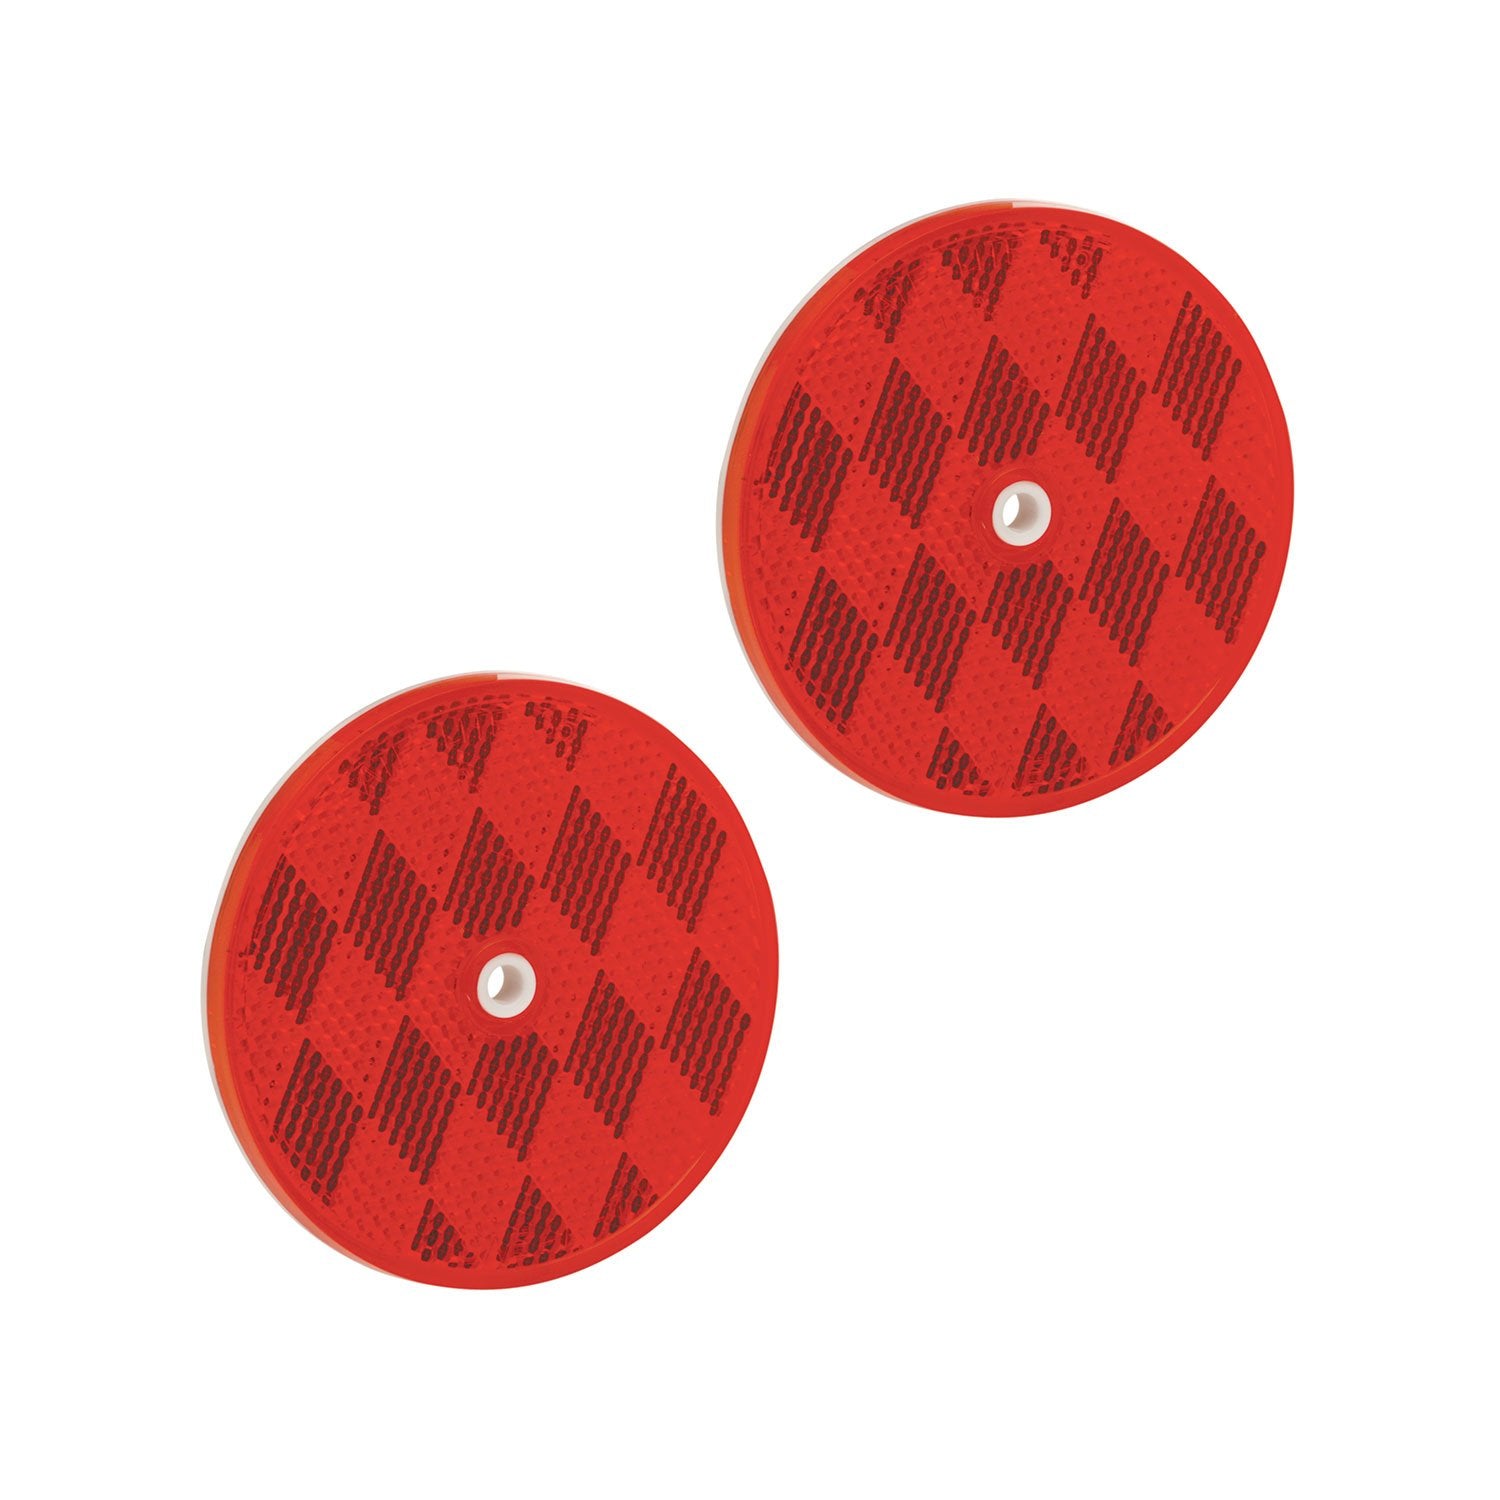 Bargman 74-68-010 Class A 3-3/16" Round Red Reflector with Center Mounting Hole - 2 Pack